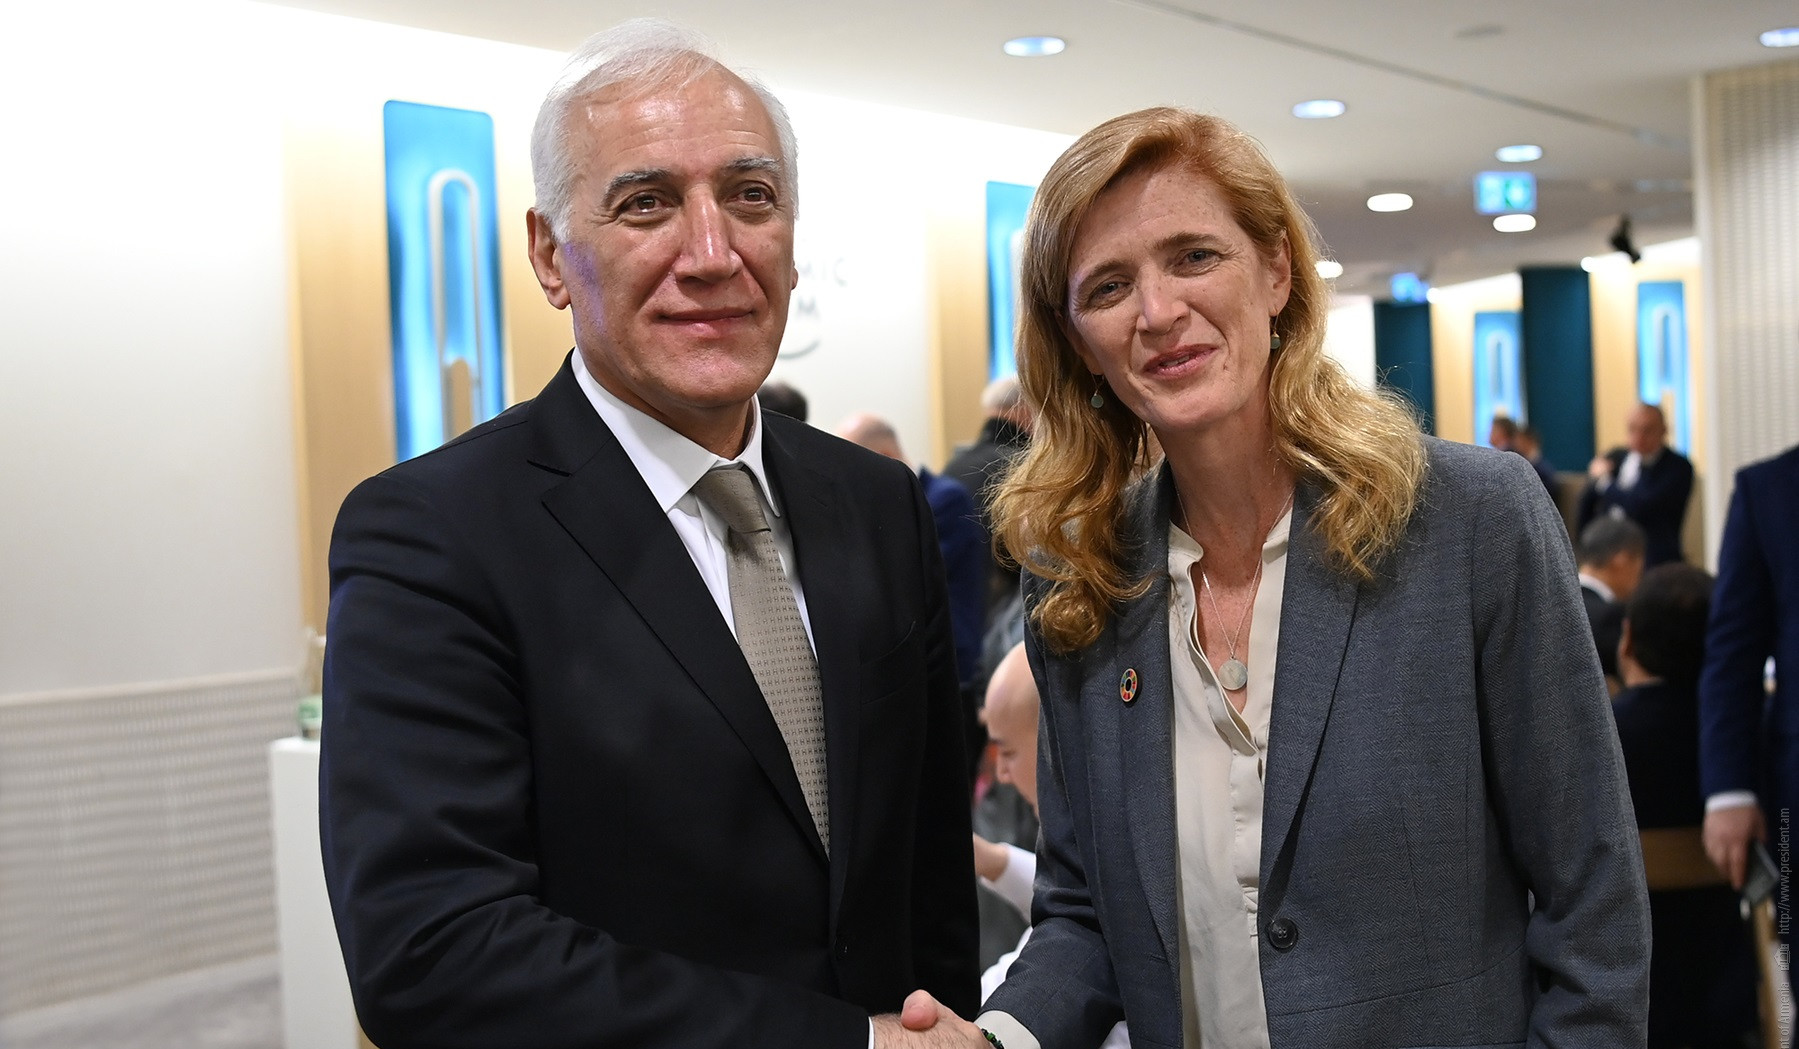 Vahagn Khachaturyan and Samantha Power discussed general situation of South Caucasus region and existing humanitarian challenges